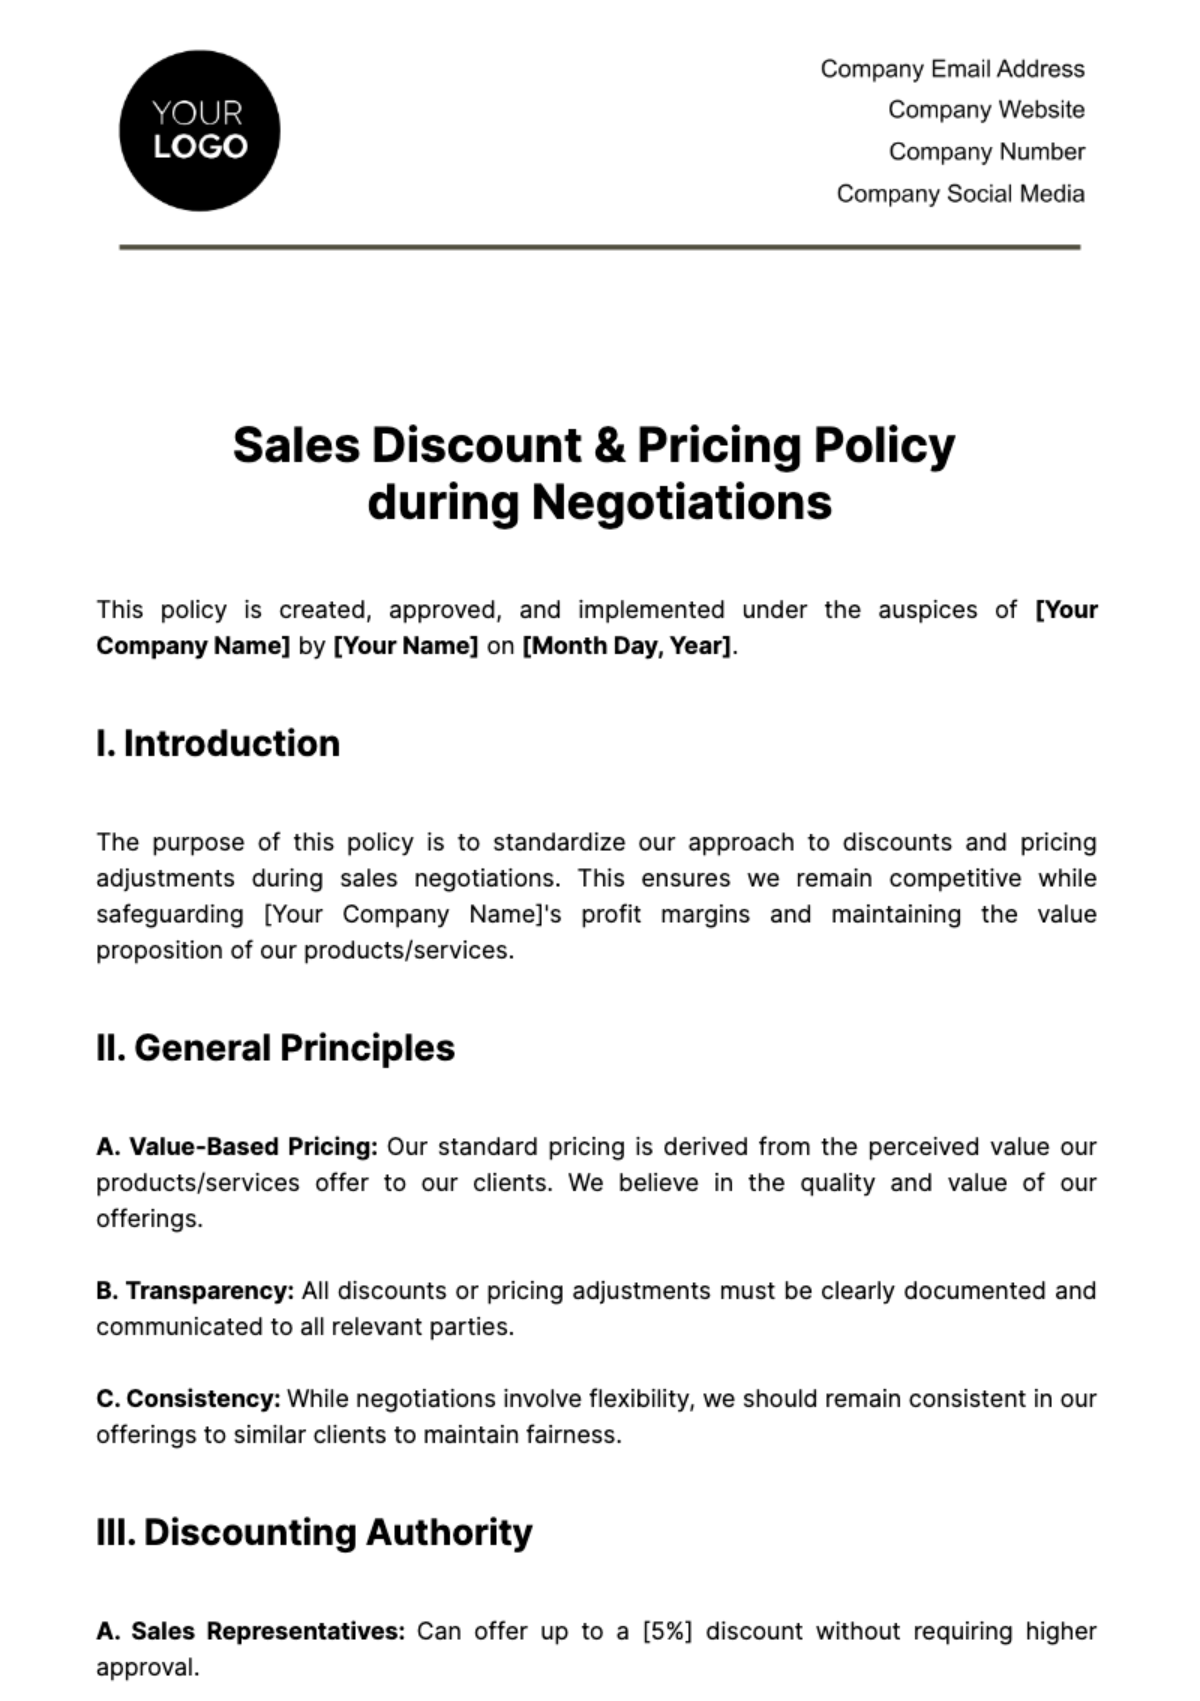 Sales Discount & Pricing Policy during Negotiations Template